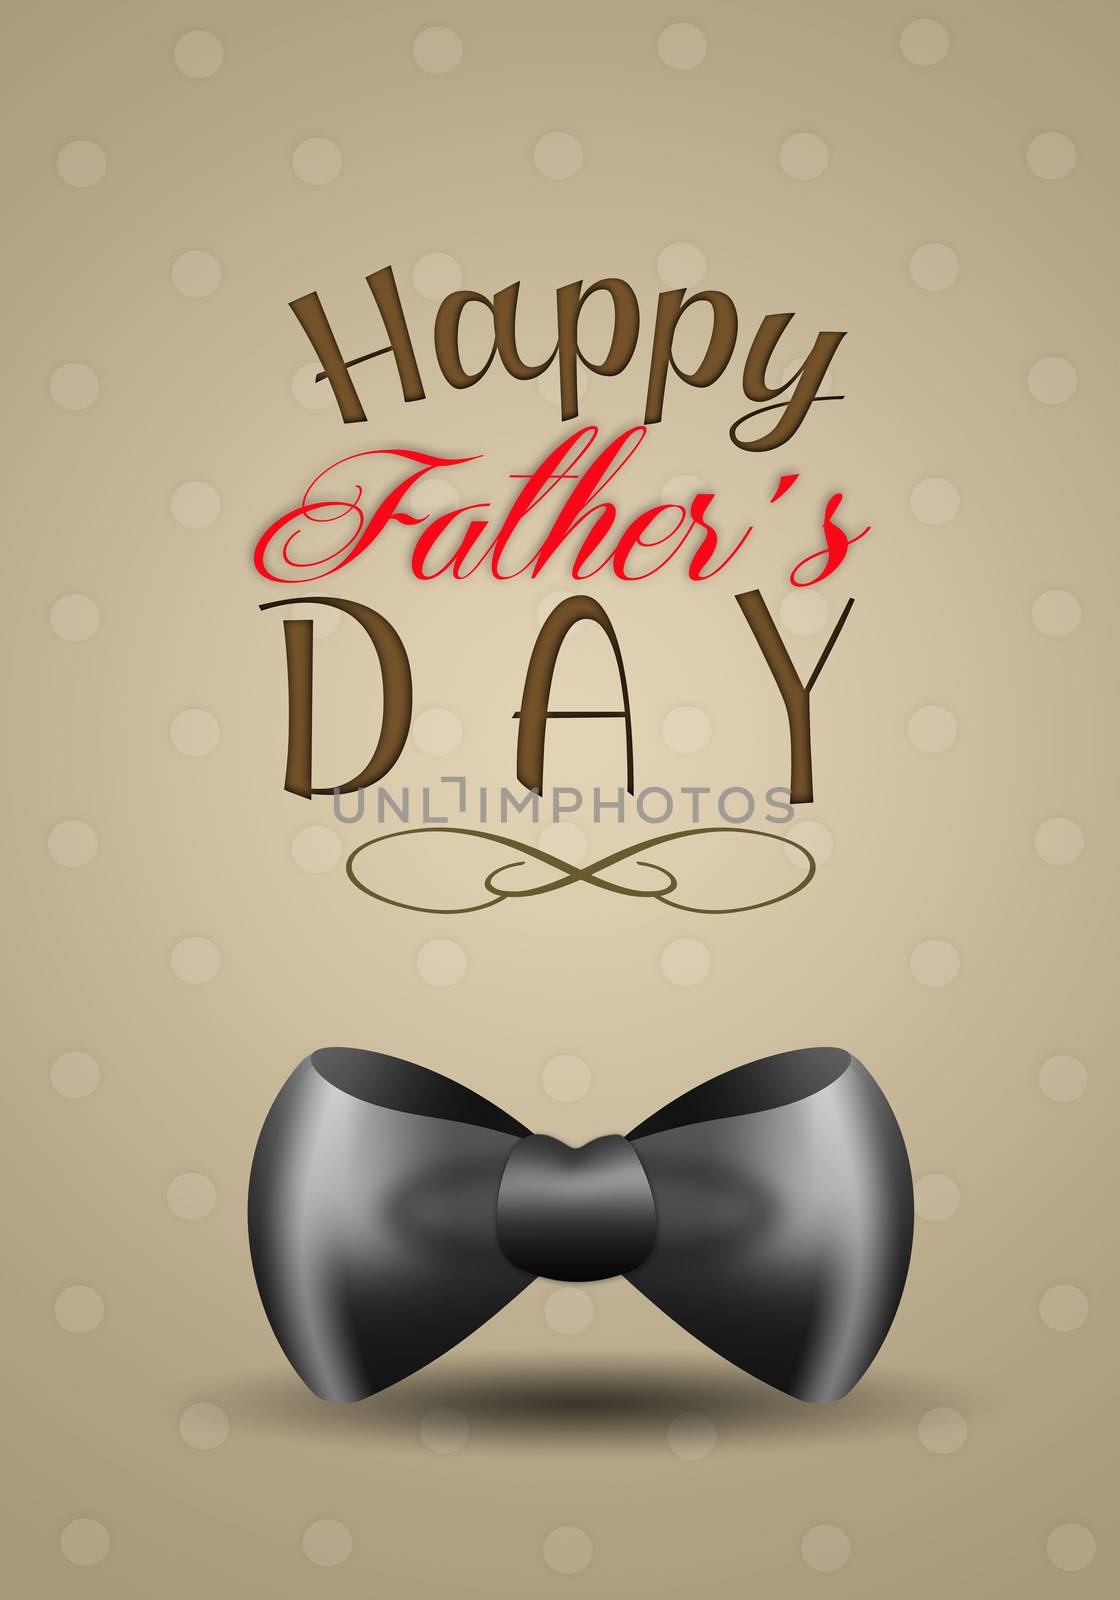 illustration of black bow tie for Father's Day